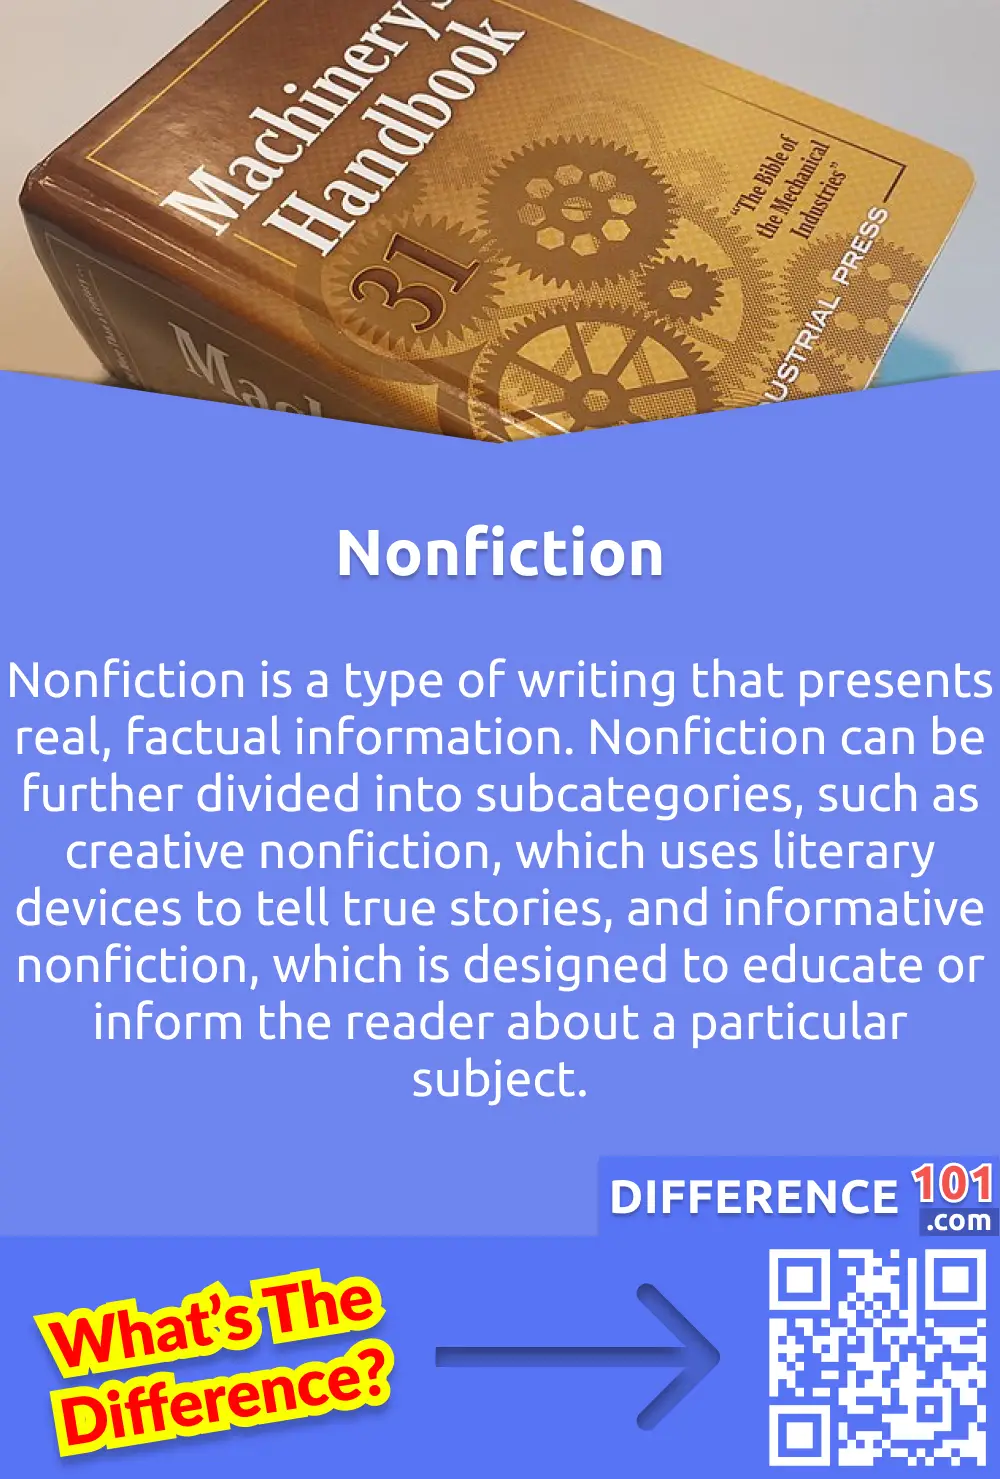 What Is Nonfiction?
Nonfiction is a type of writing that presents real, factual information. Nonfiction can be further divided into subcategories, such as creative nonfiction, which uses literary devices to tell true stories, and informative nonfiction, which is designed to educate or inform the reader about a particular subject.